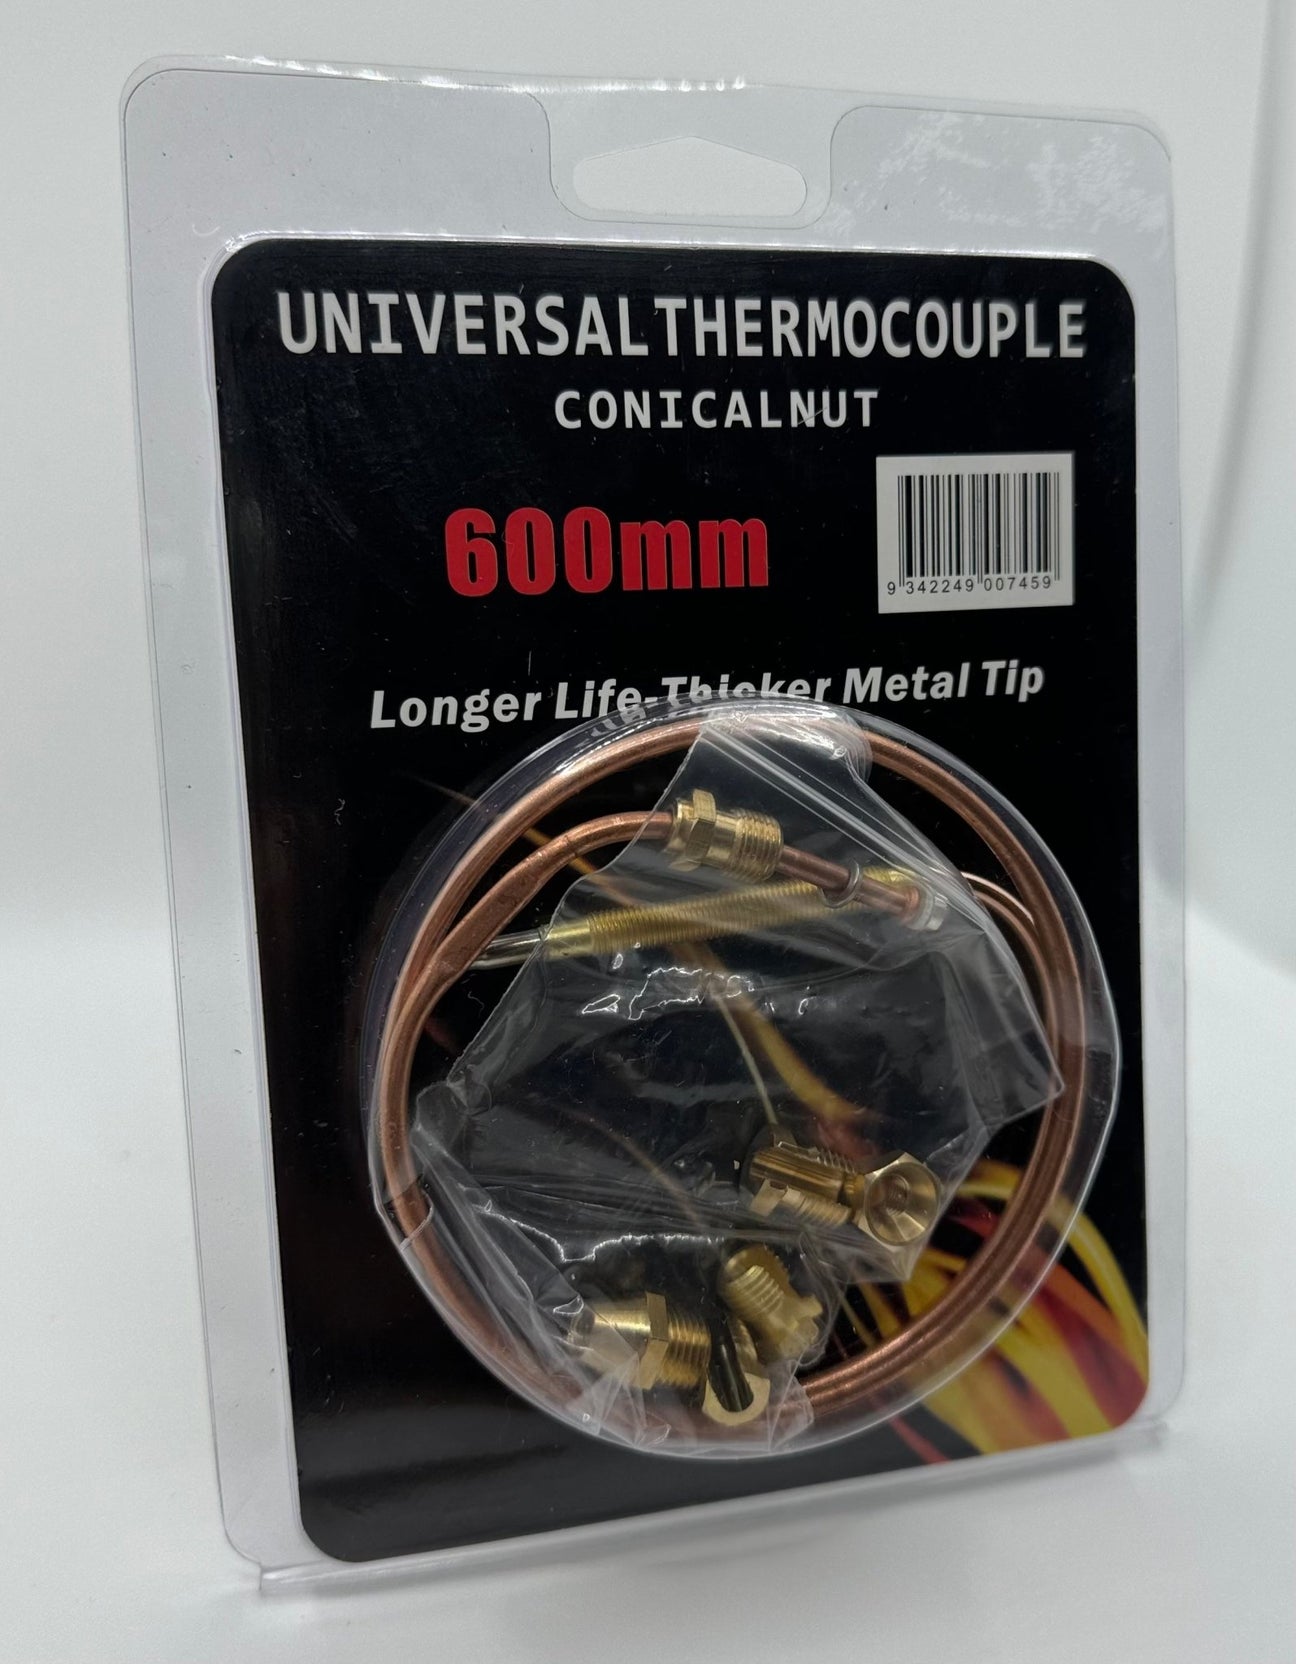 Thermocouples - My Oven Spares